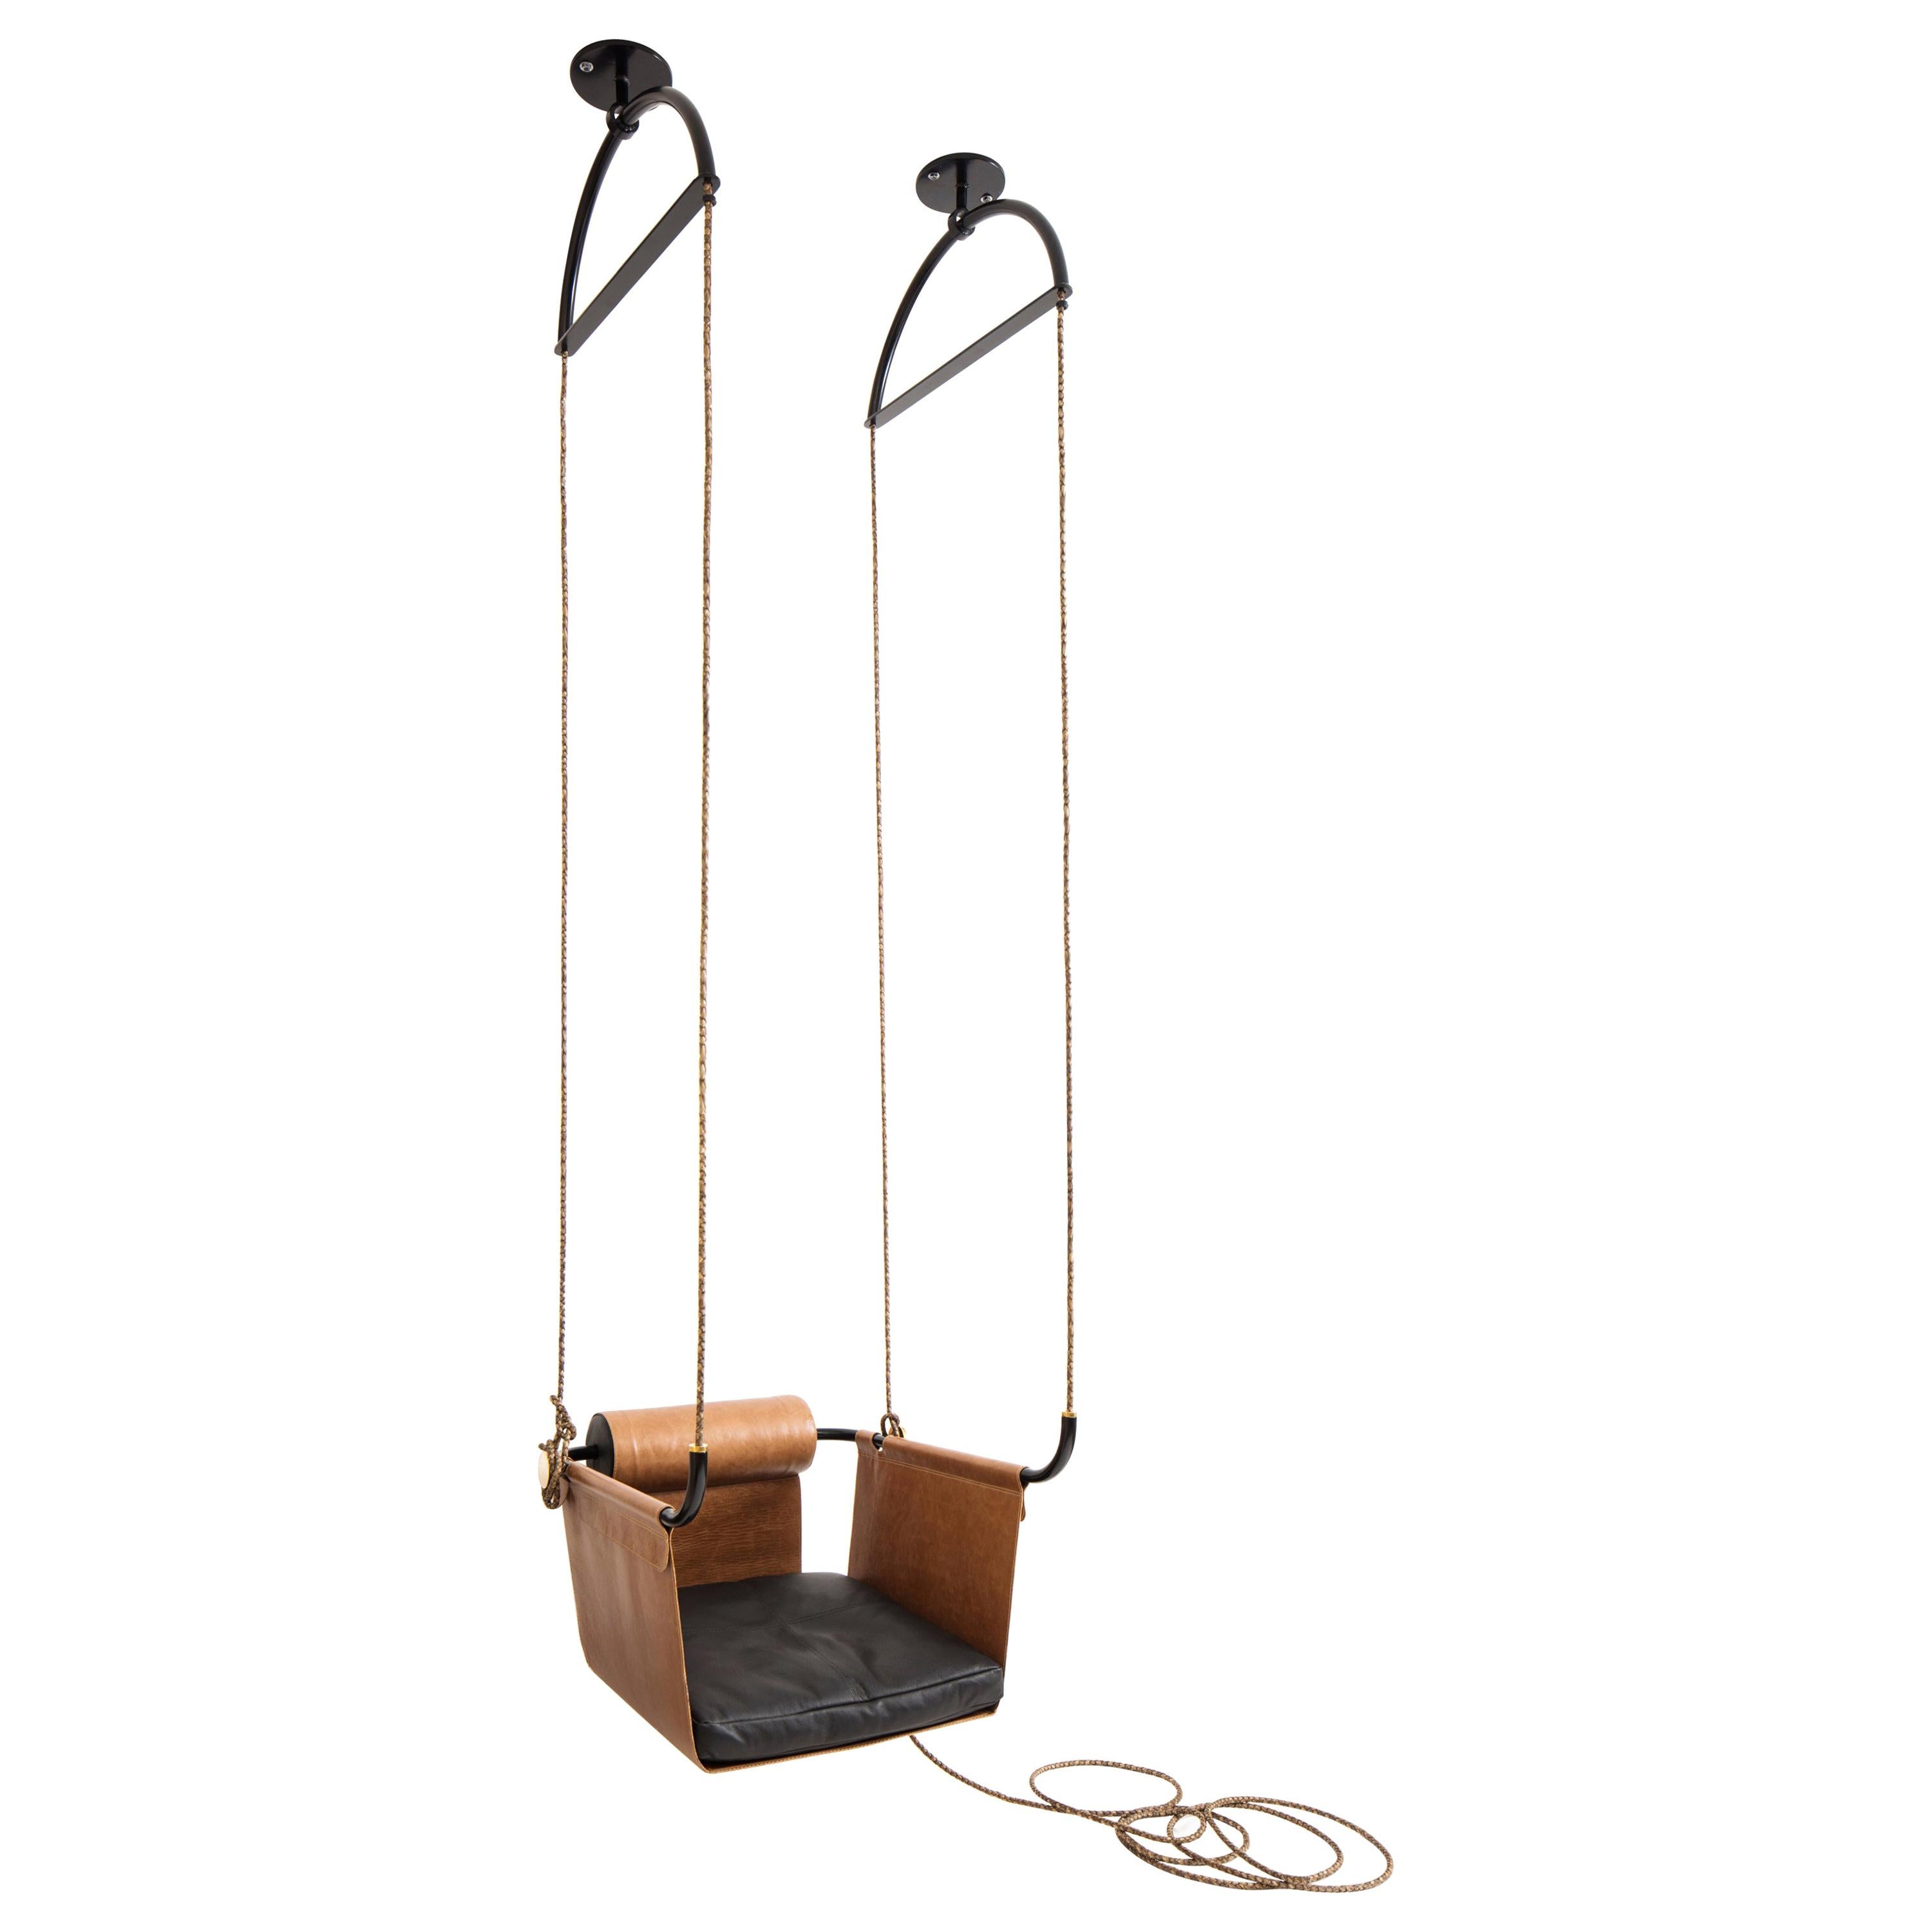 Home Swing, Brazilian Leather Design by Atelier Decarvalho